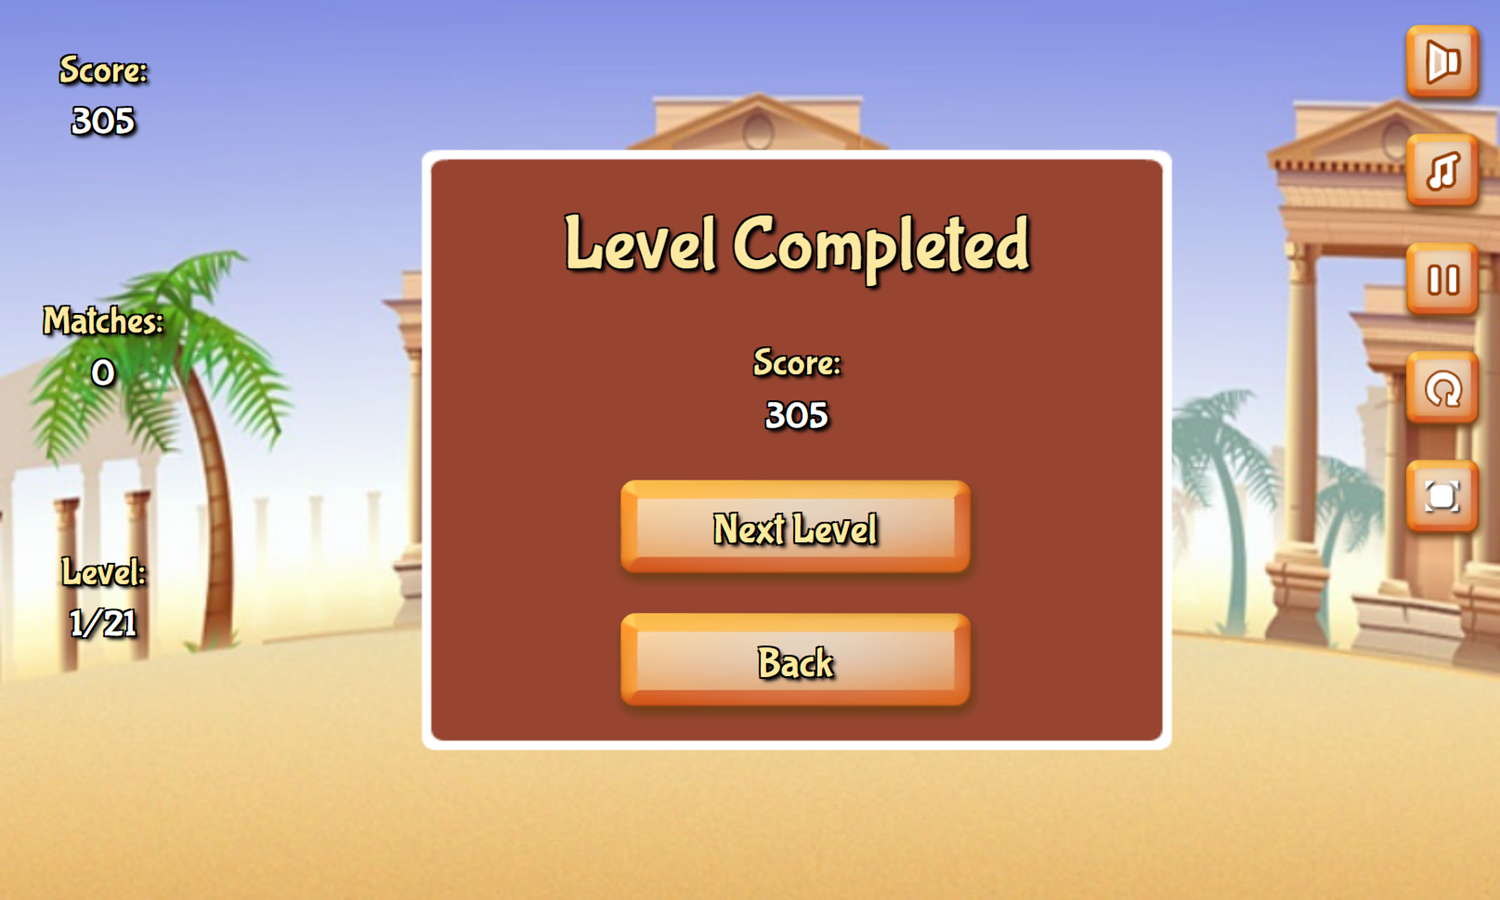 Jolly Jong Sands of Egypt Game Level Completed Screenshot.